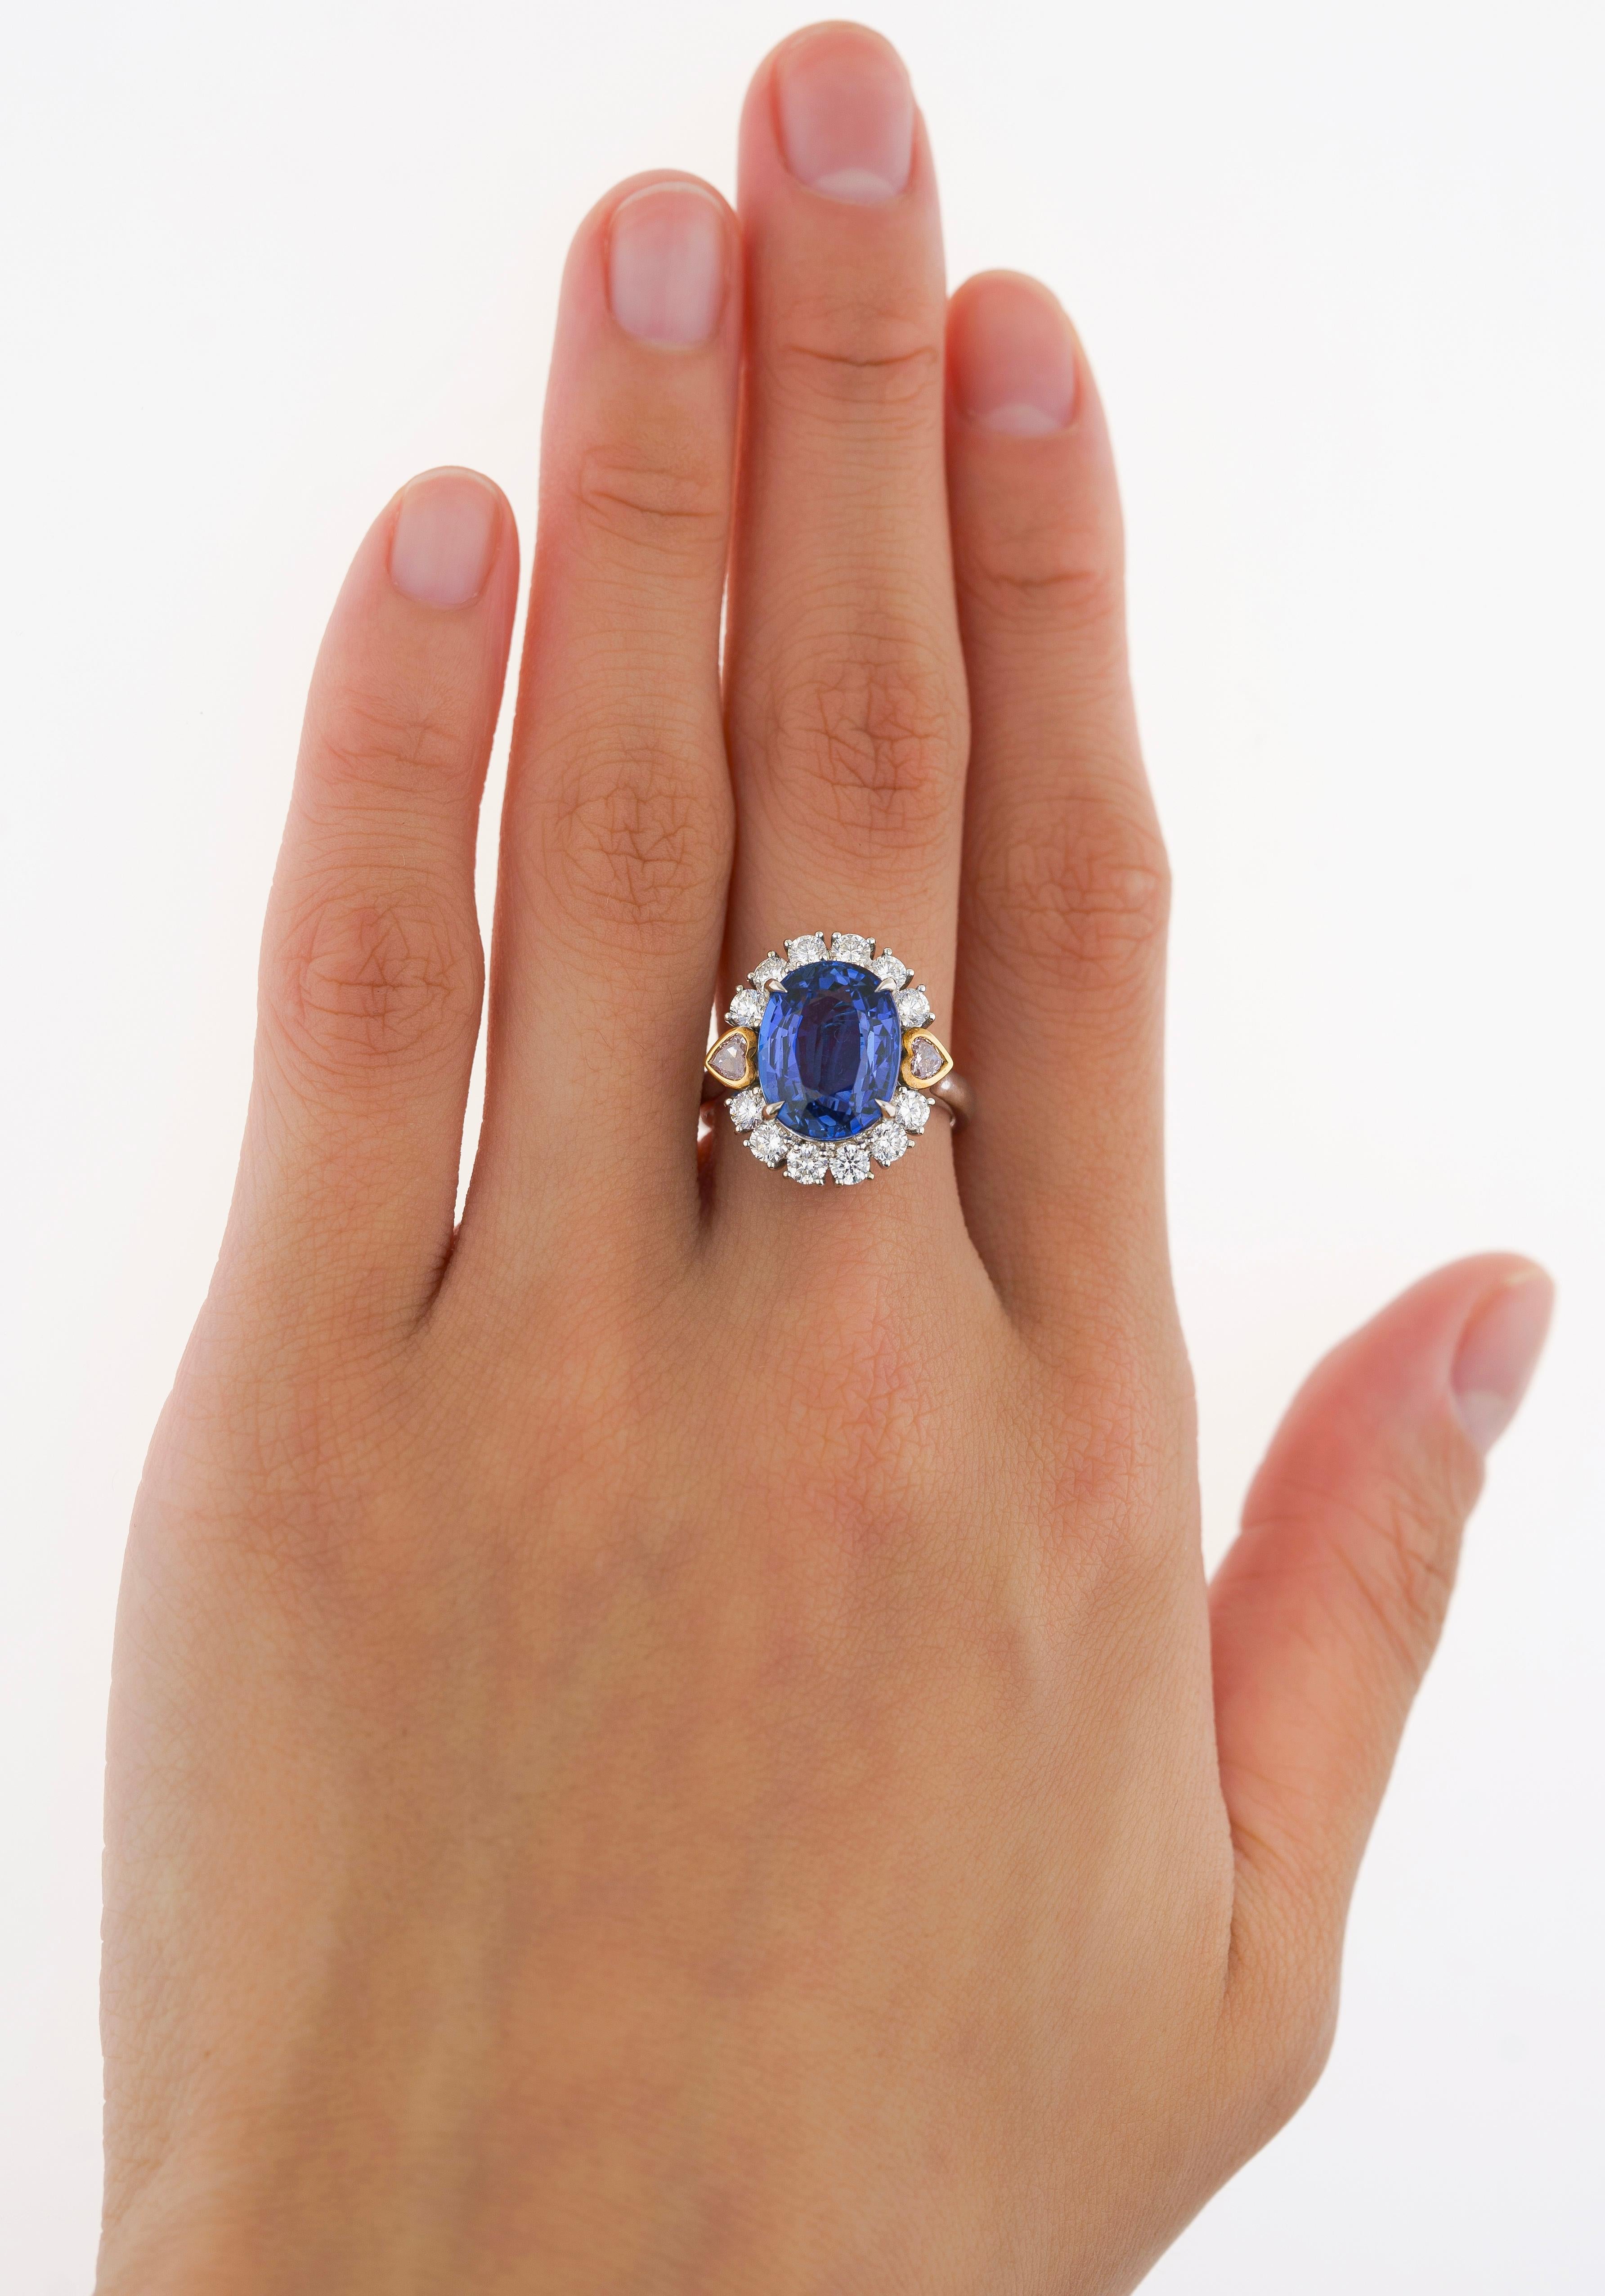 7.25 Carat No Heat Oval Cut Blue Sapphire Ring With Pink Diamond Side Stones For Sale 2